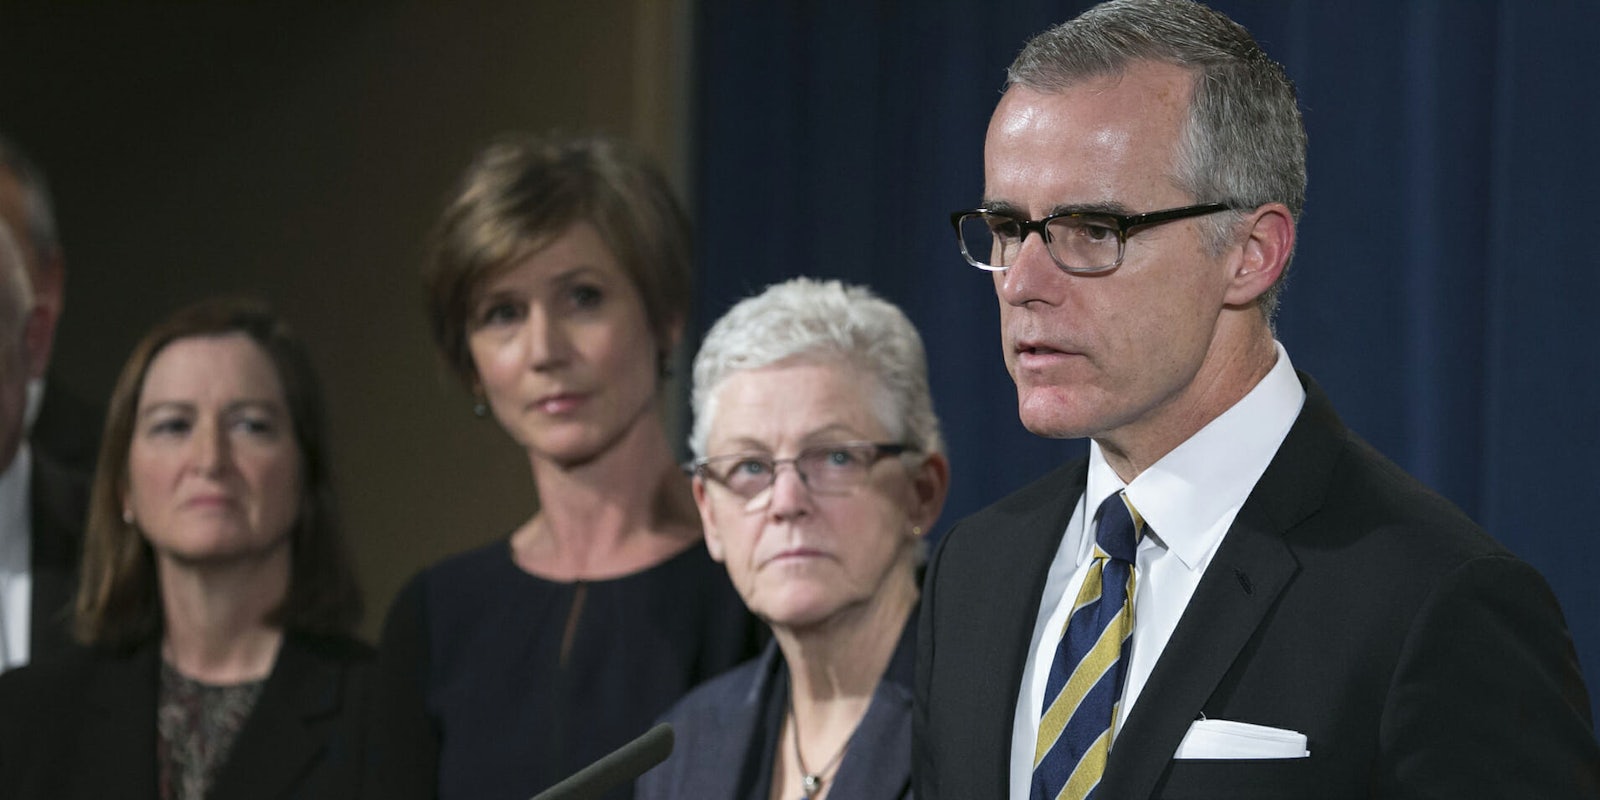 With Andrew McCabe reportedly stepping down from the FBI, theories are emerging as to why he is leaving the agency despite it being somewhat expected.